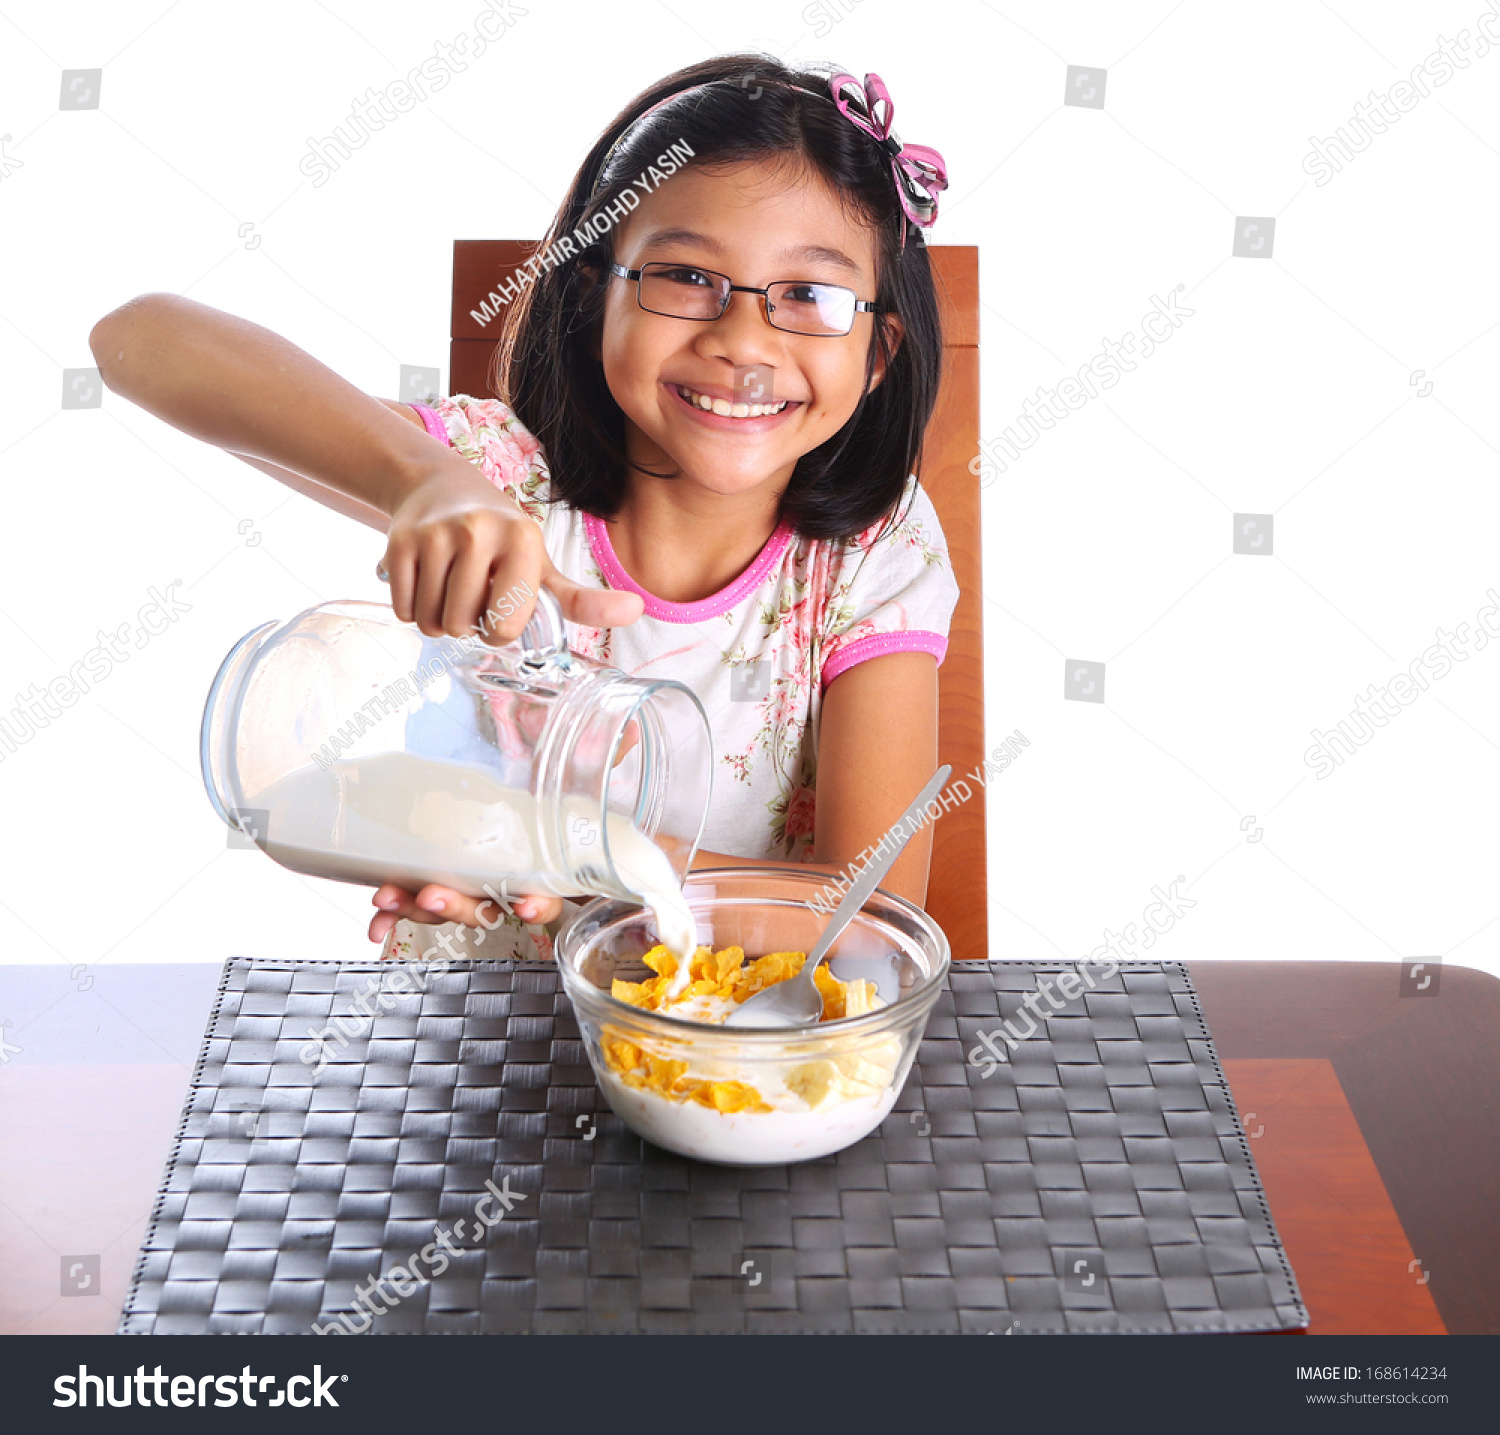 Young Asian Girl Pouring Milk Into A Bowl Of Cere